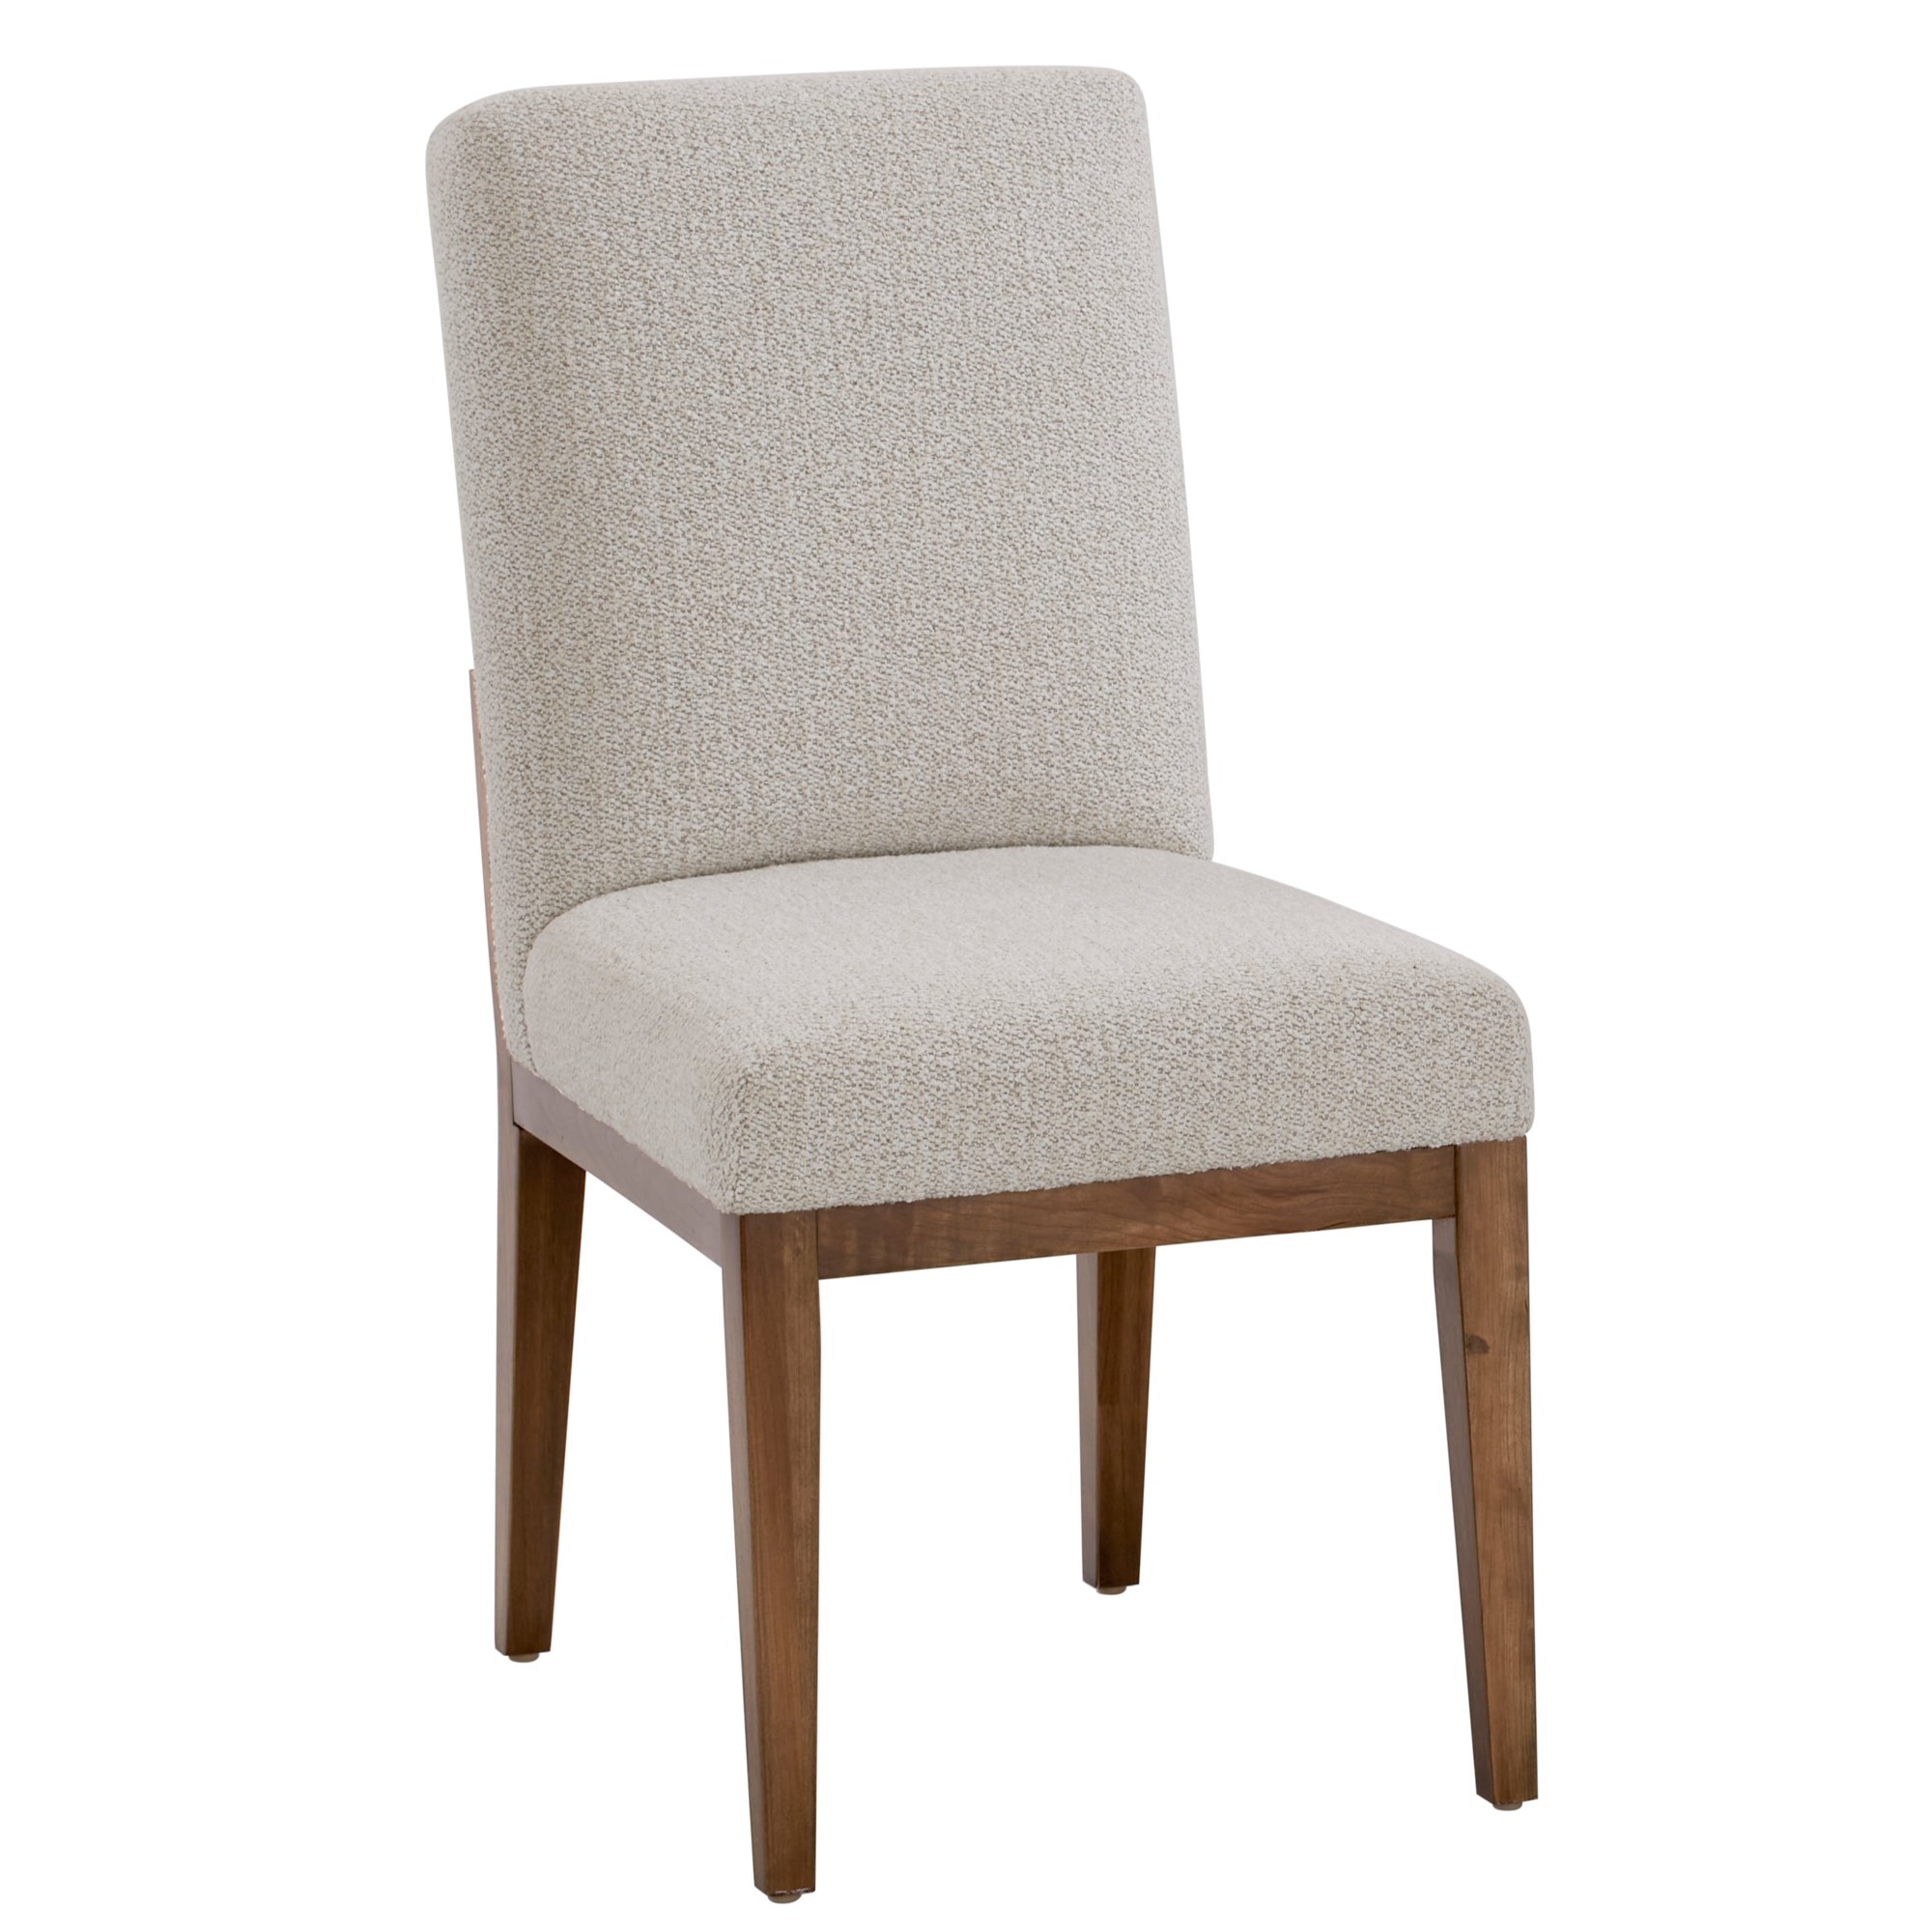 Contemporary Side Side Dining Vaughan Chair Cherry | Chairs | Squirrel Upholstered Furniture Brown - Chair - Crafted Medium 151-030B Dining Bassett